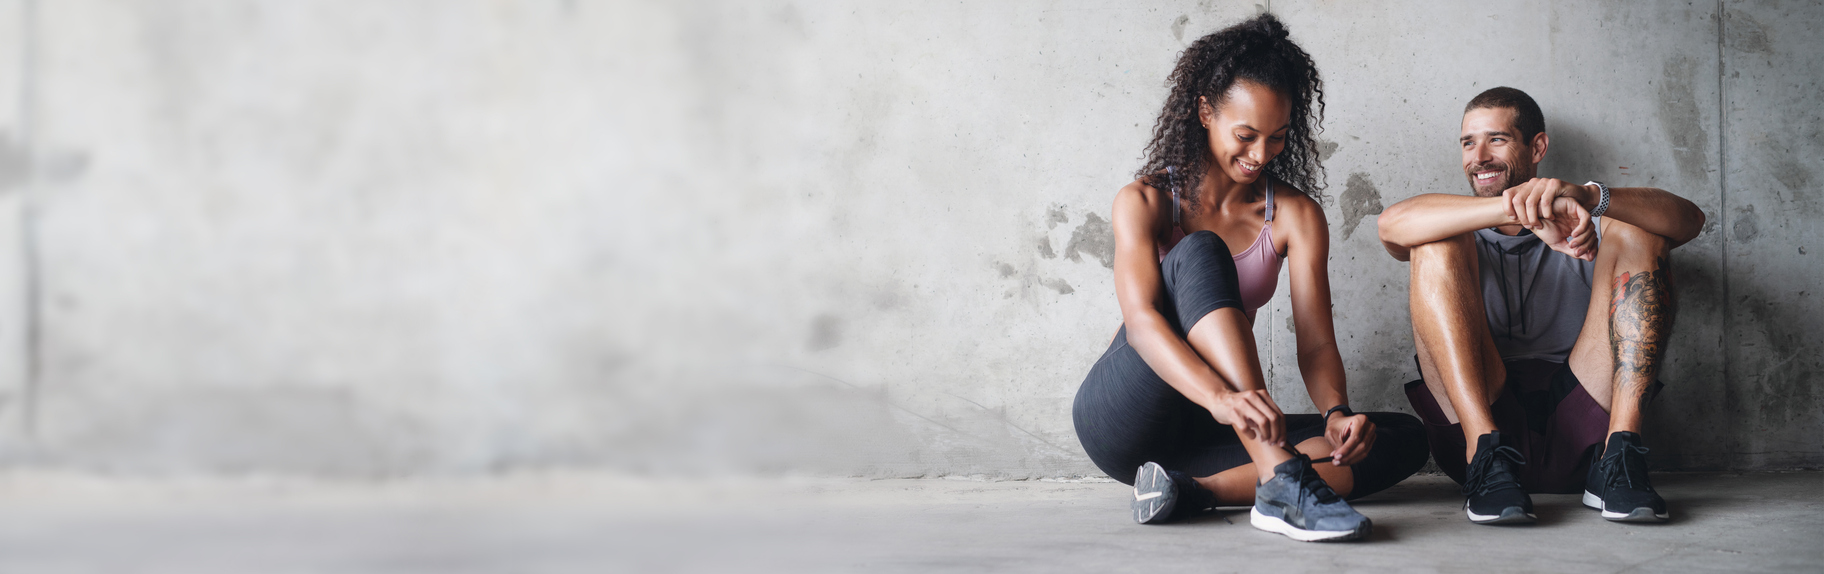 Should fitness instructors be trained in mental health?